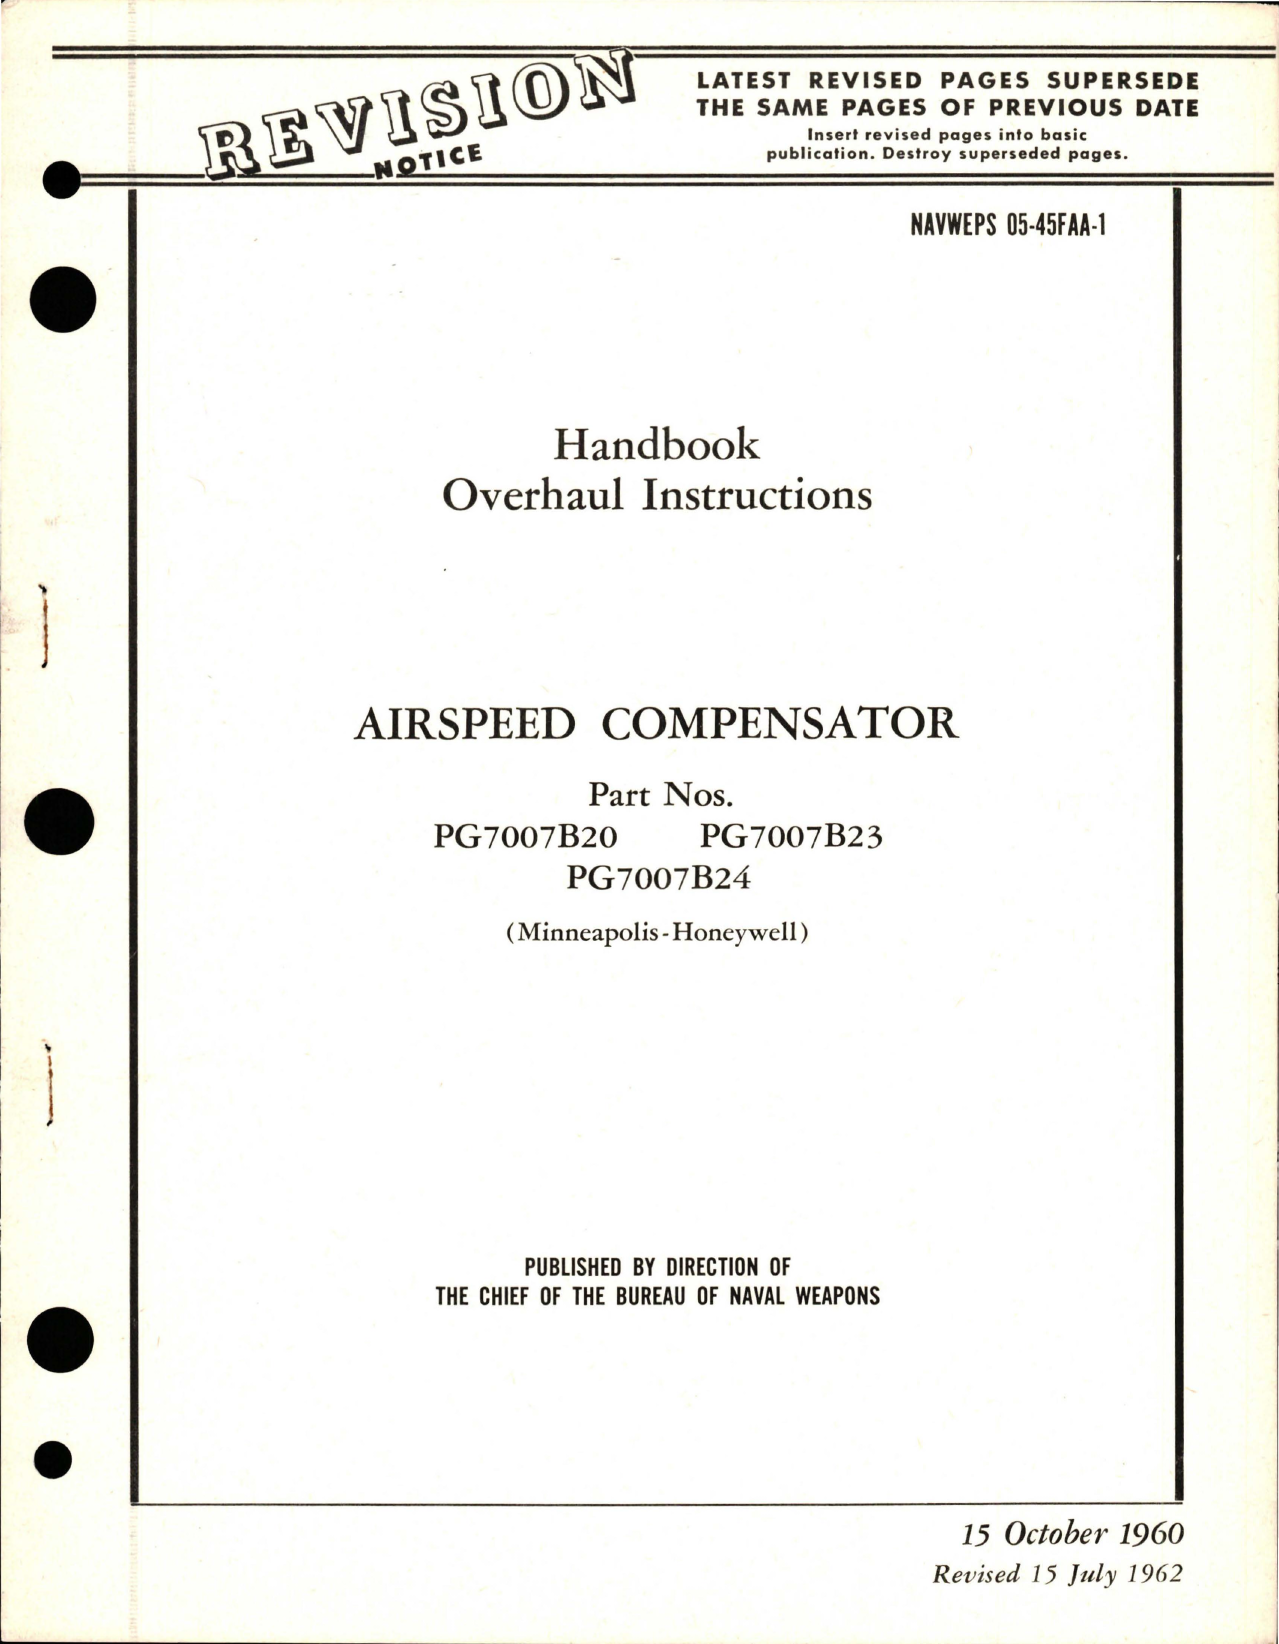 Sample page 1 from AirCorps Library document: Overhaul Instructions for Airspeed Compensator - Parts PG7007B20, PG7007B23, and PG7007B24